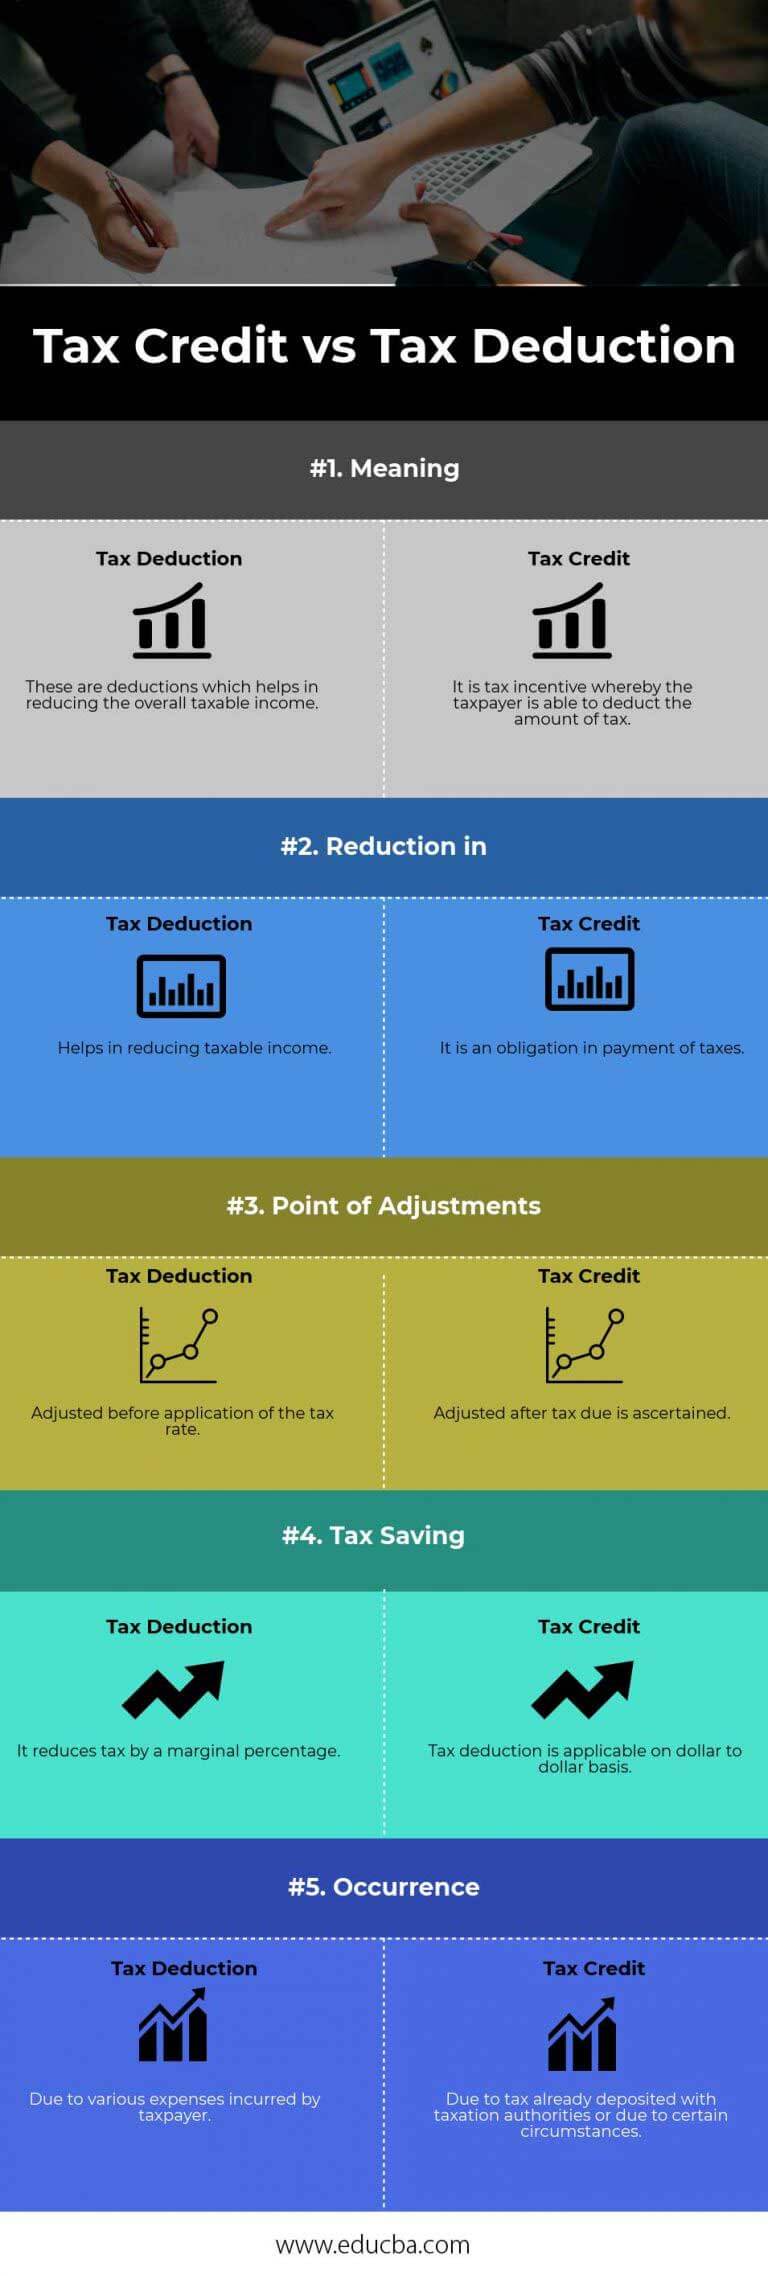 tax-credit-vs-tax-deduction-top-5-best-differences-and-comparisons